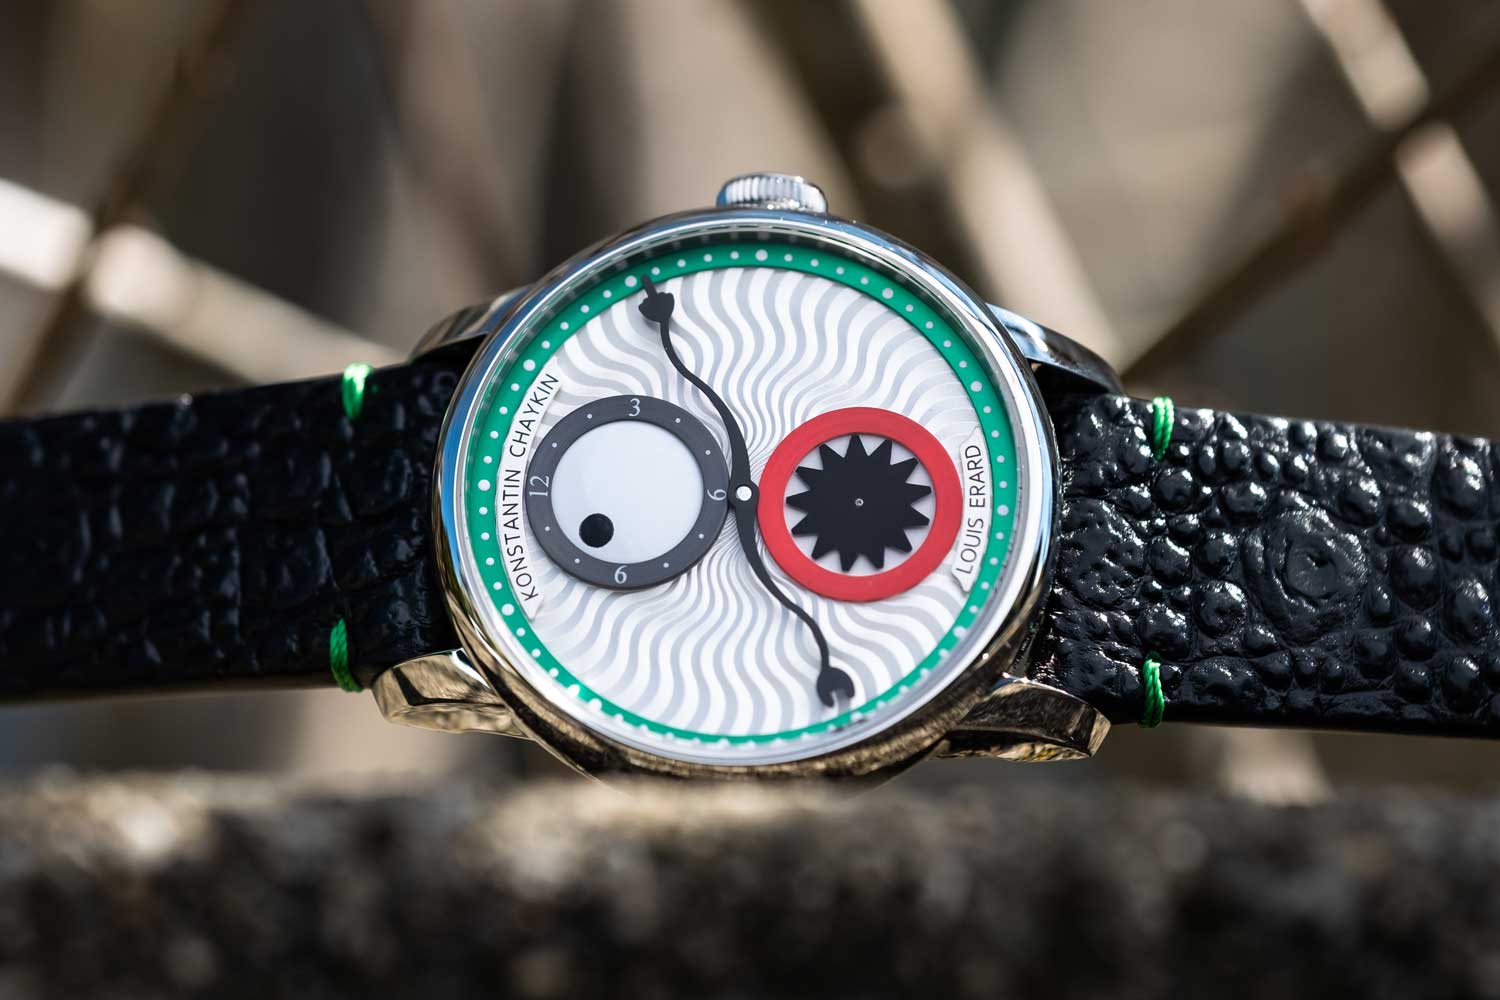 The dial of the "Time Eater" features a wavy "sun-ray" pattern taken from the original Joker watch that debuted in 2017